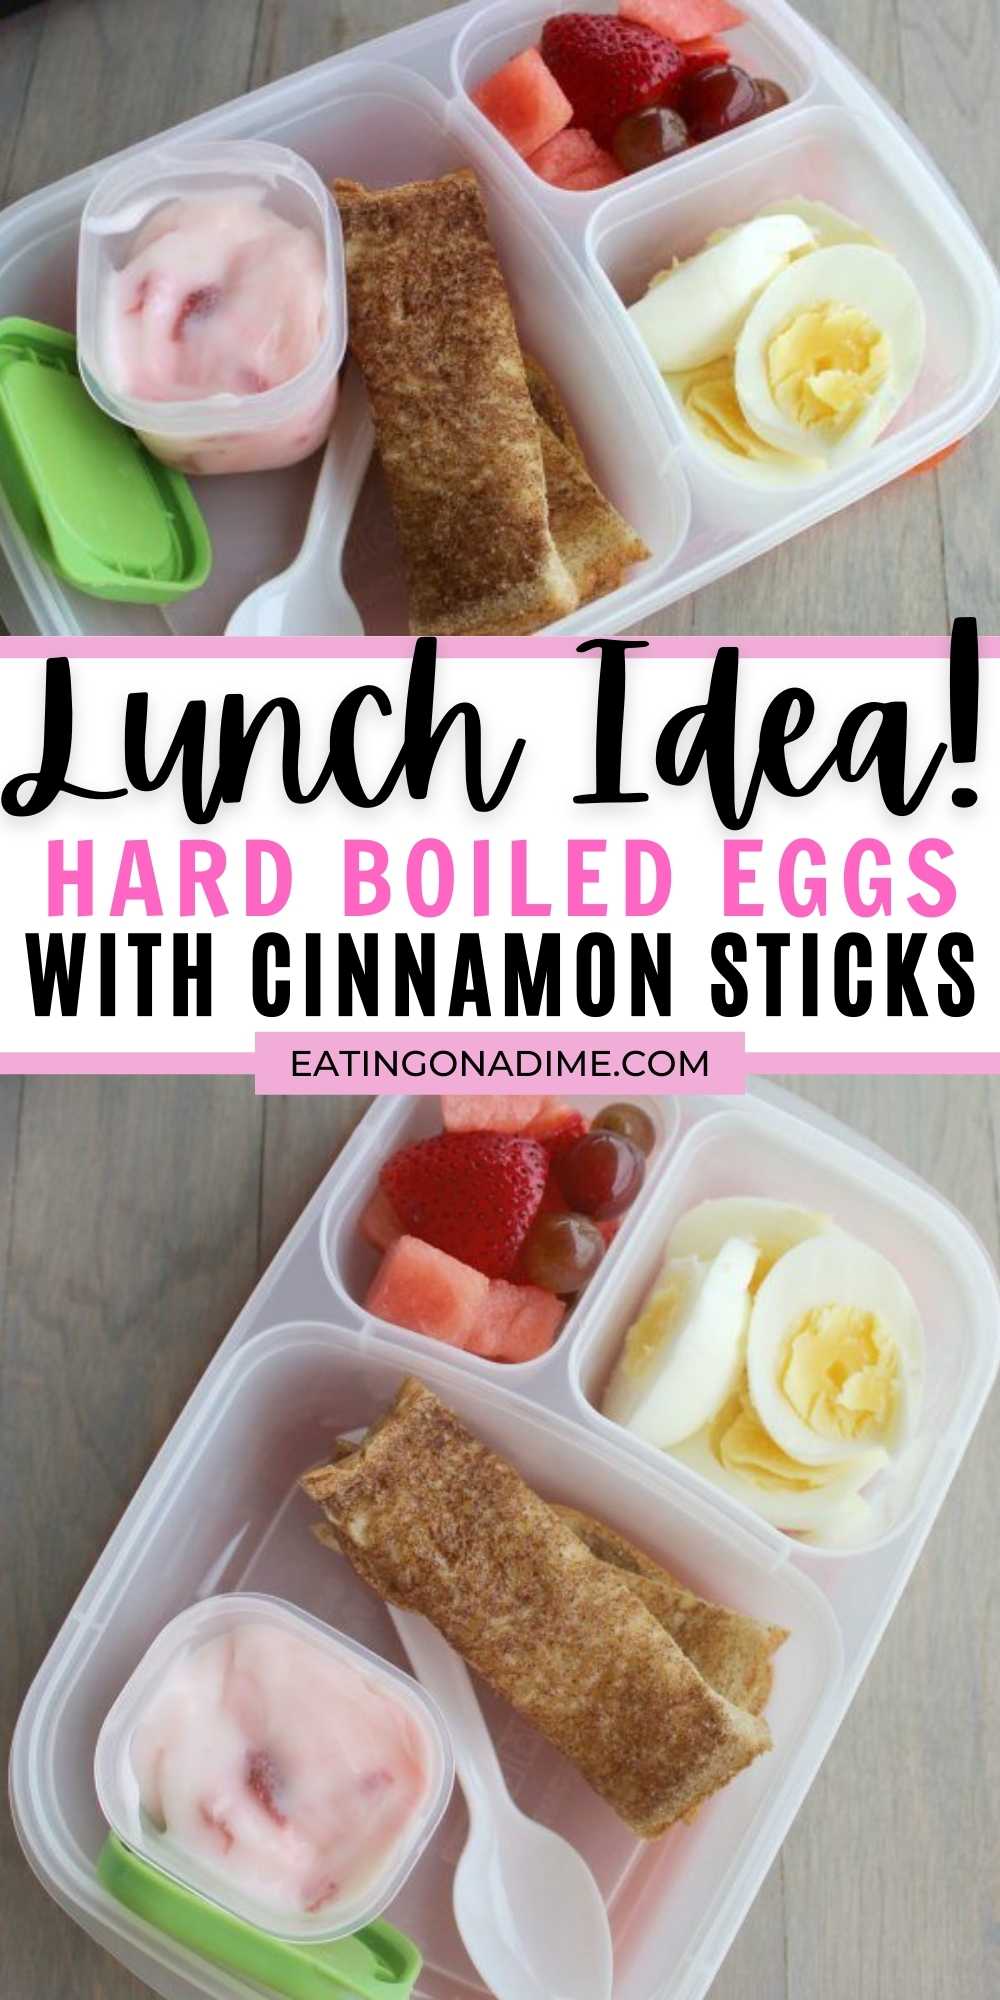 These hard boil eggs with cinnamon stick is easy to make and the perfect lunch for school or for home.  This easy to make lunch is healthy and great for picky eaters too.  This simple lunch recipe is one of my all time favorite kids lunch ideas!  It’s perfect for the entire family.  #eatingonadime #lunchrecipes #easylunchideas #kidfriendlyrecipes 
